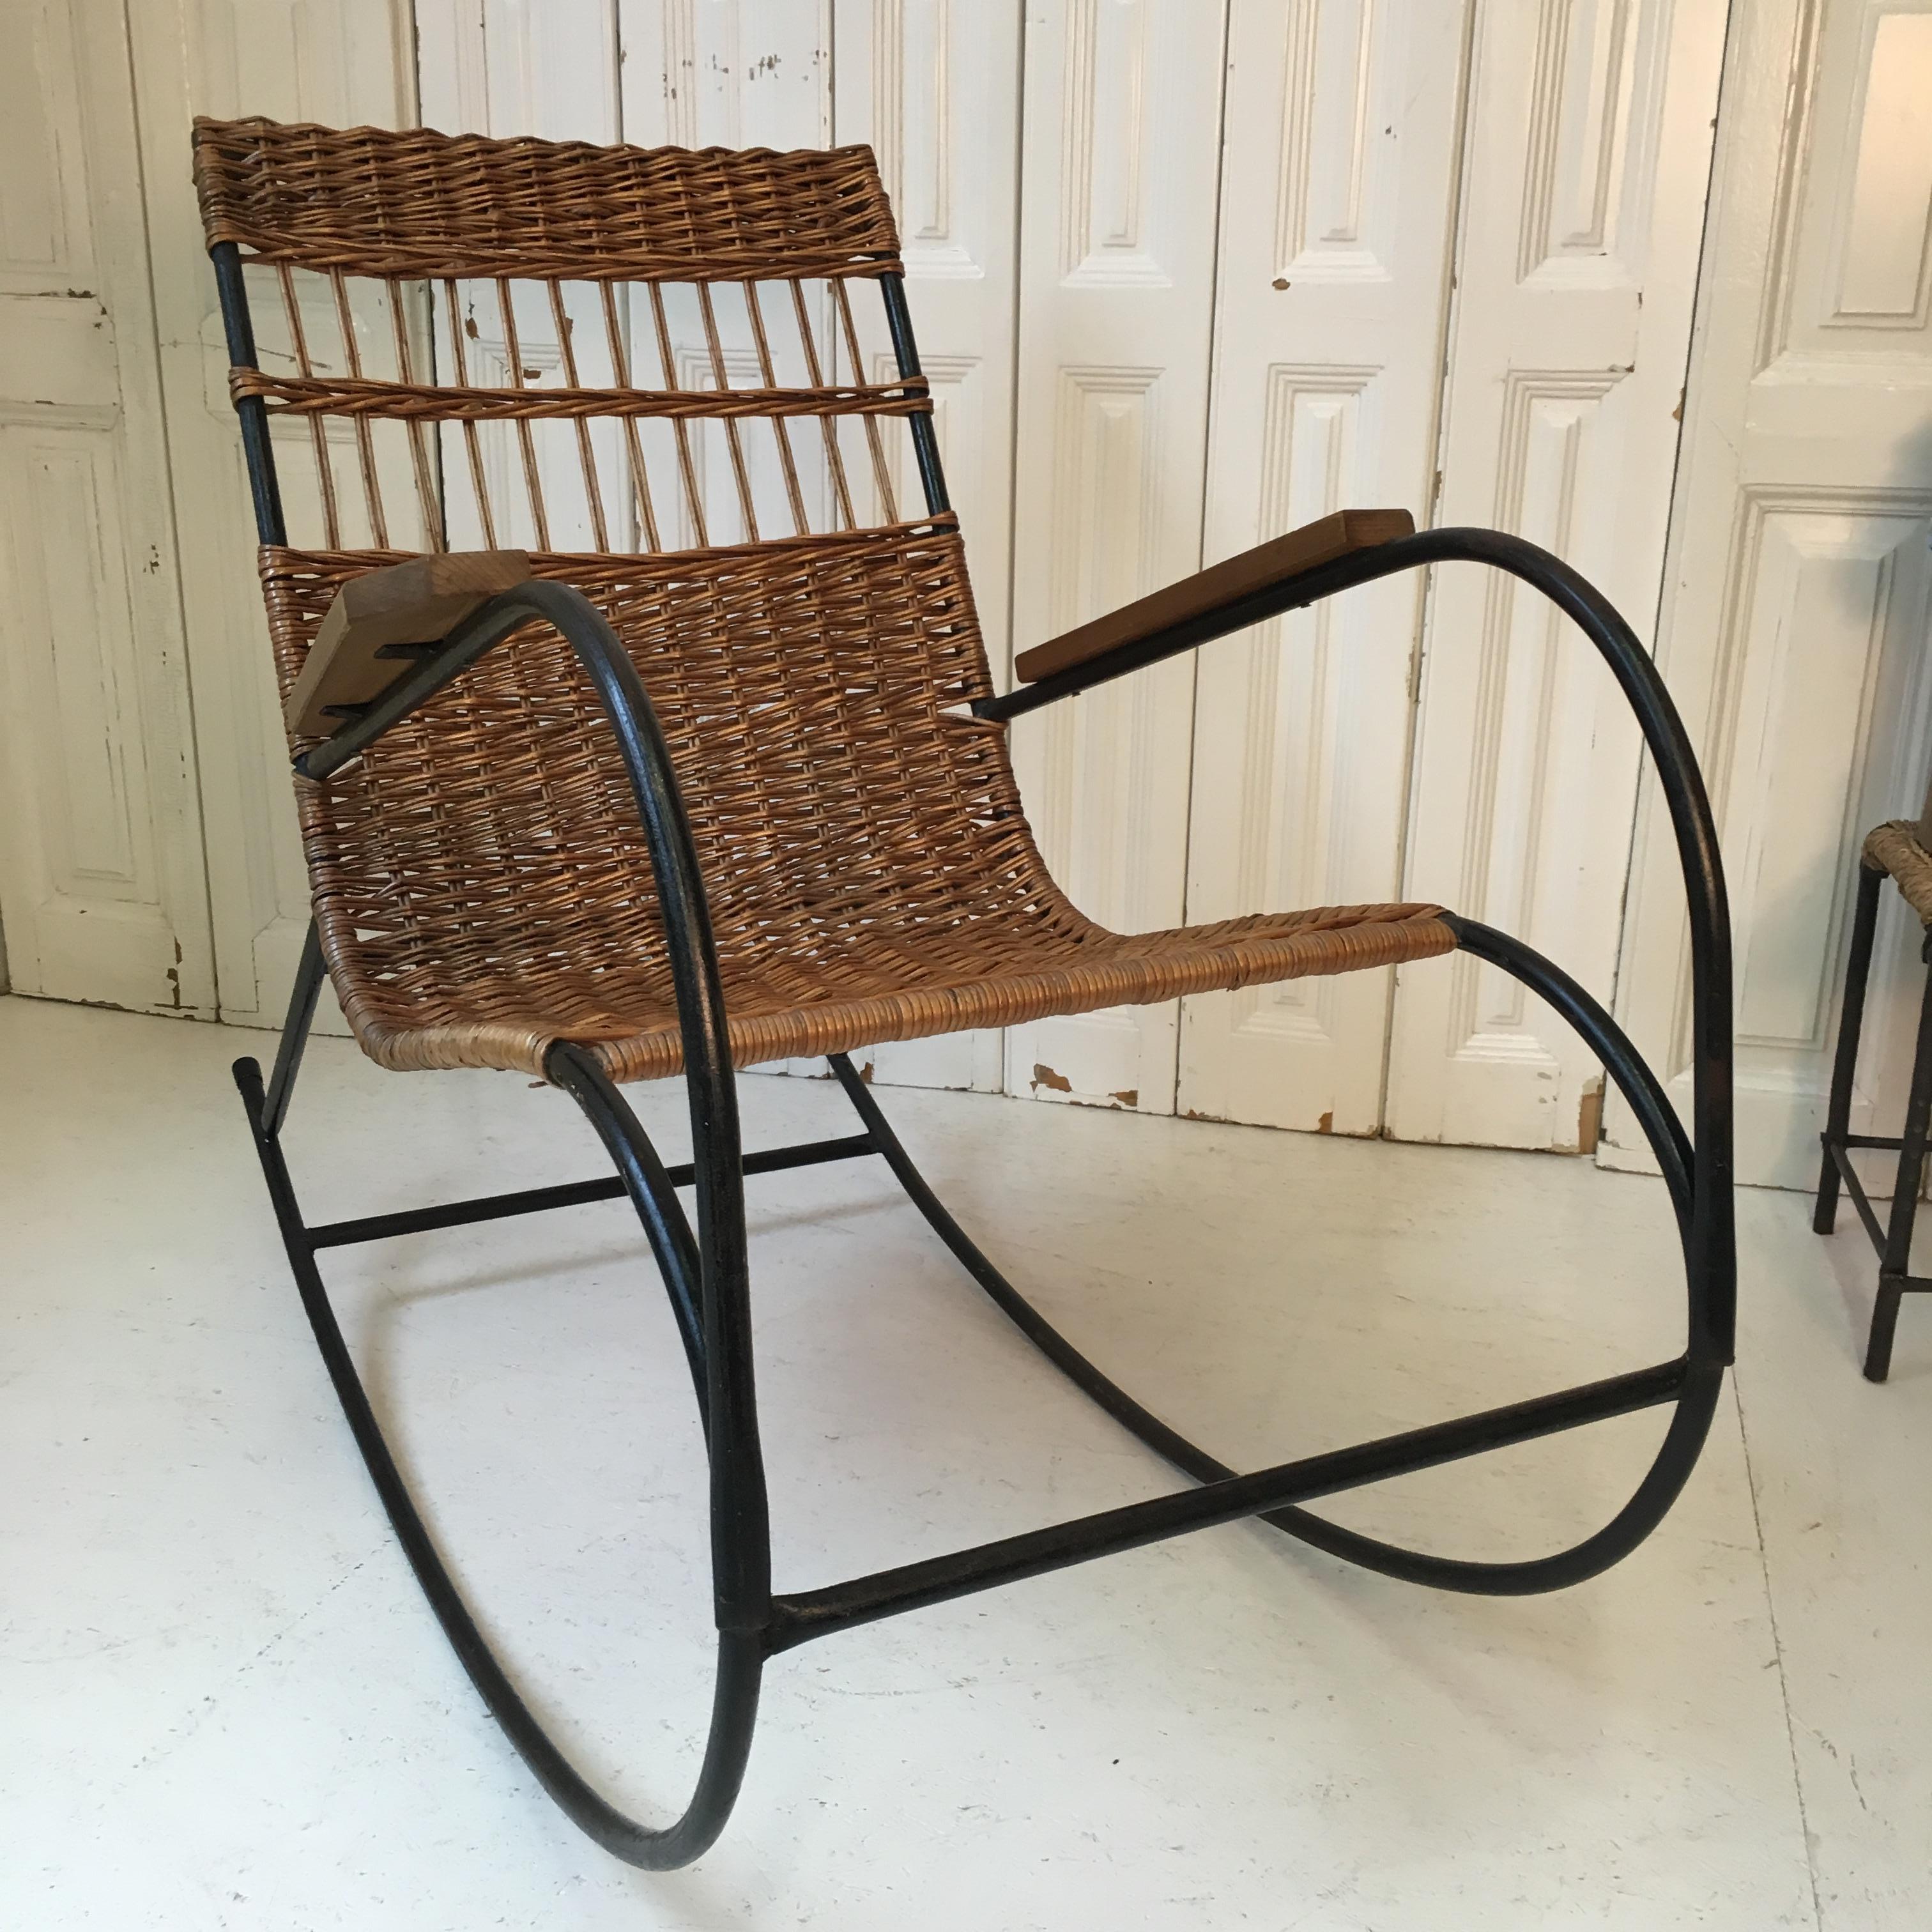 Fabric Industrial Iron & Wicker Rocking Chair with Vintage Linen Cushion, Mid-Century